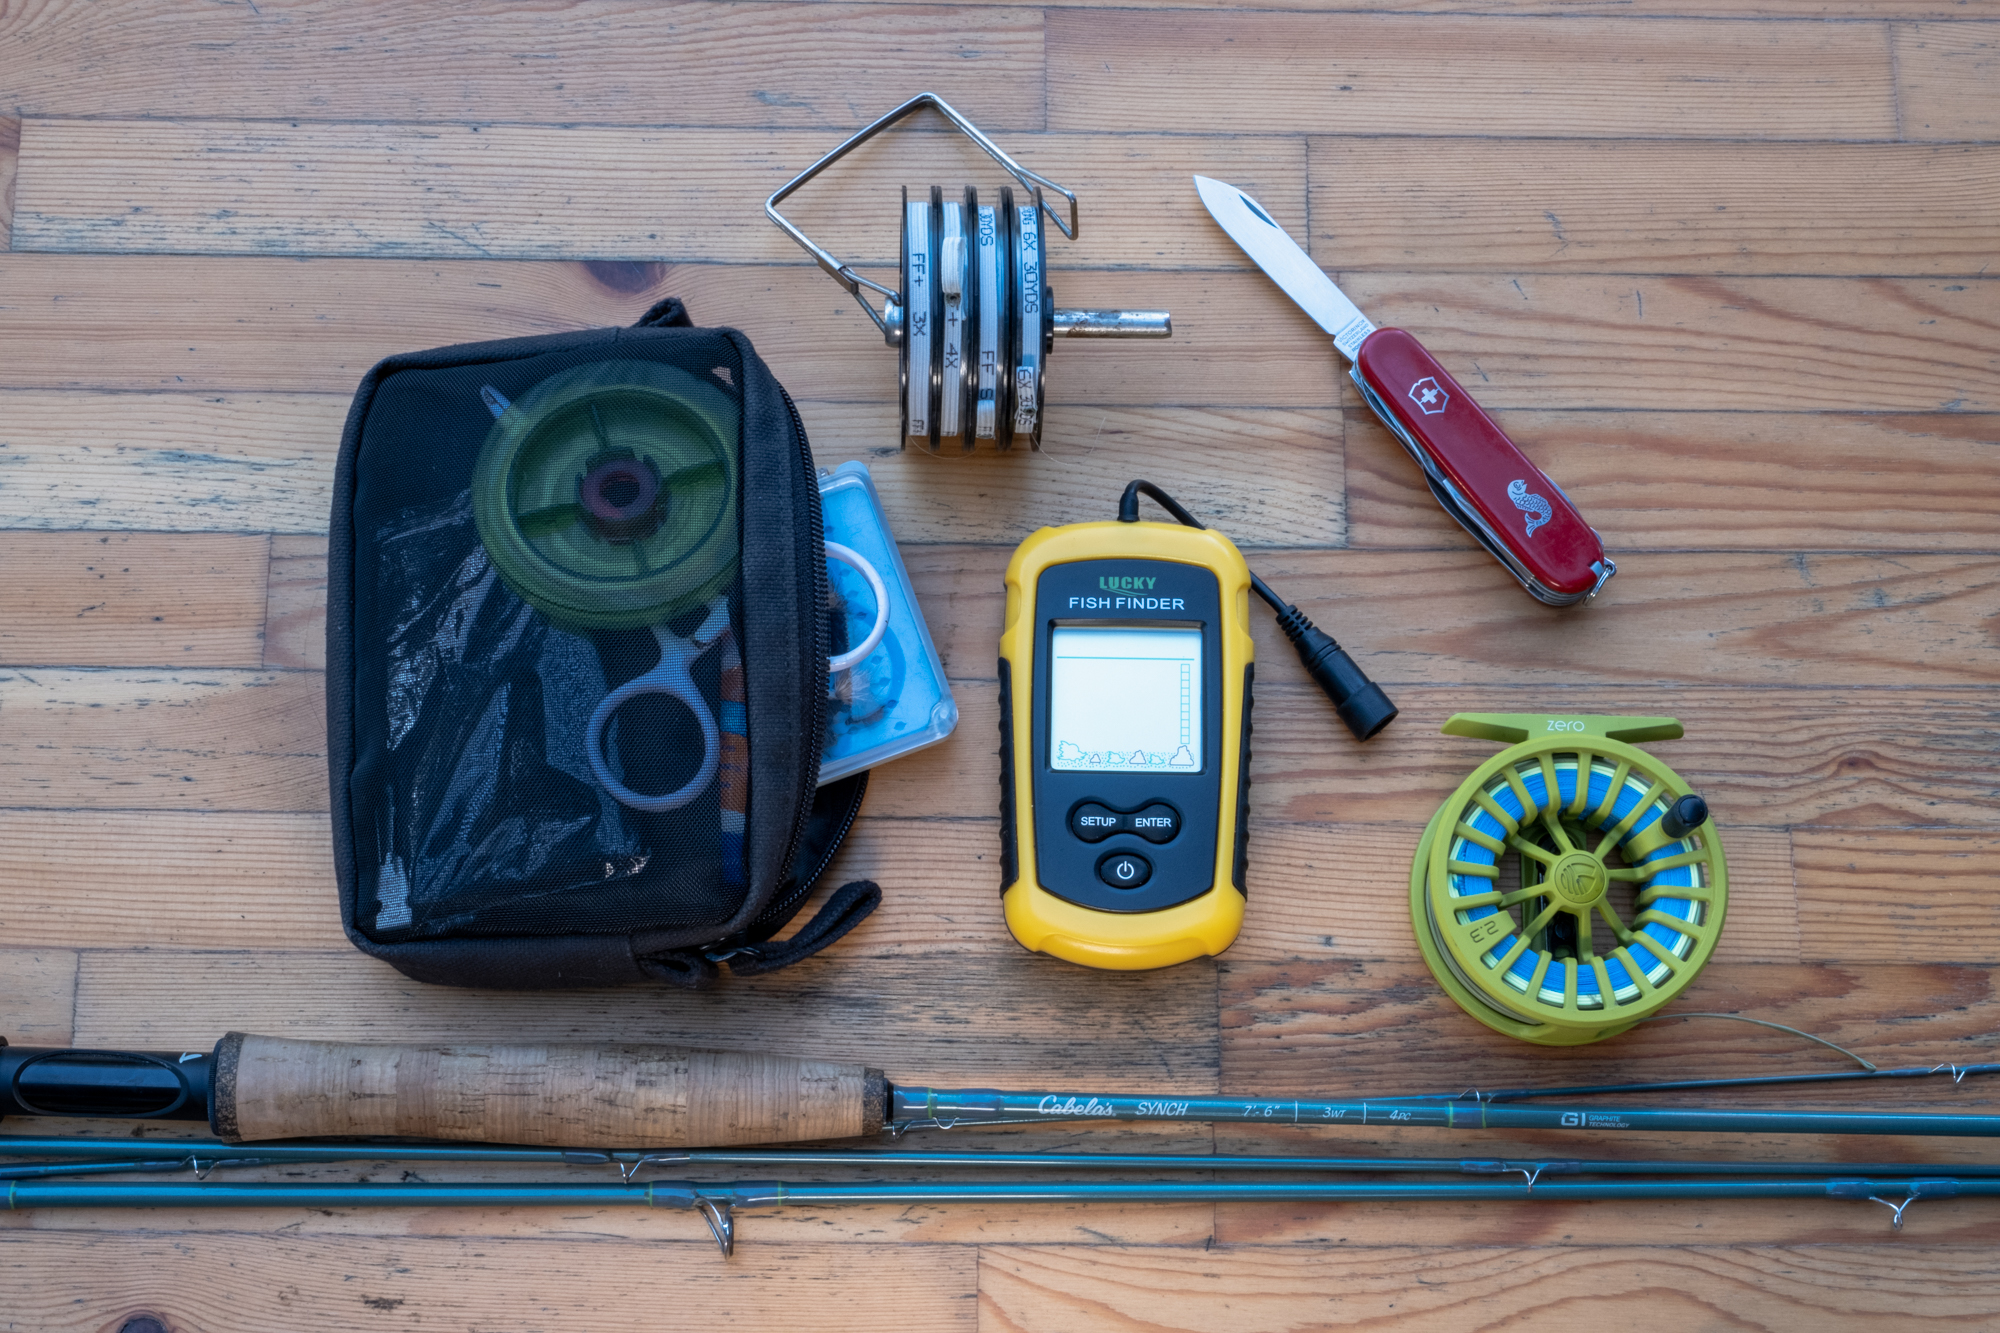 An assortment of cheap fishing gear on a table including swiss army knife, fly rod, reel, and a fish finder